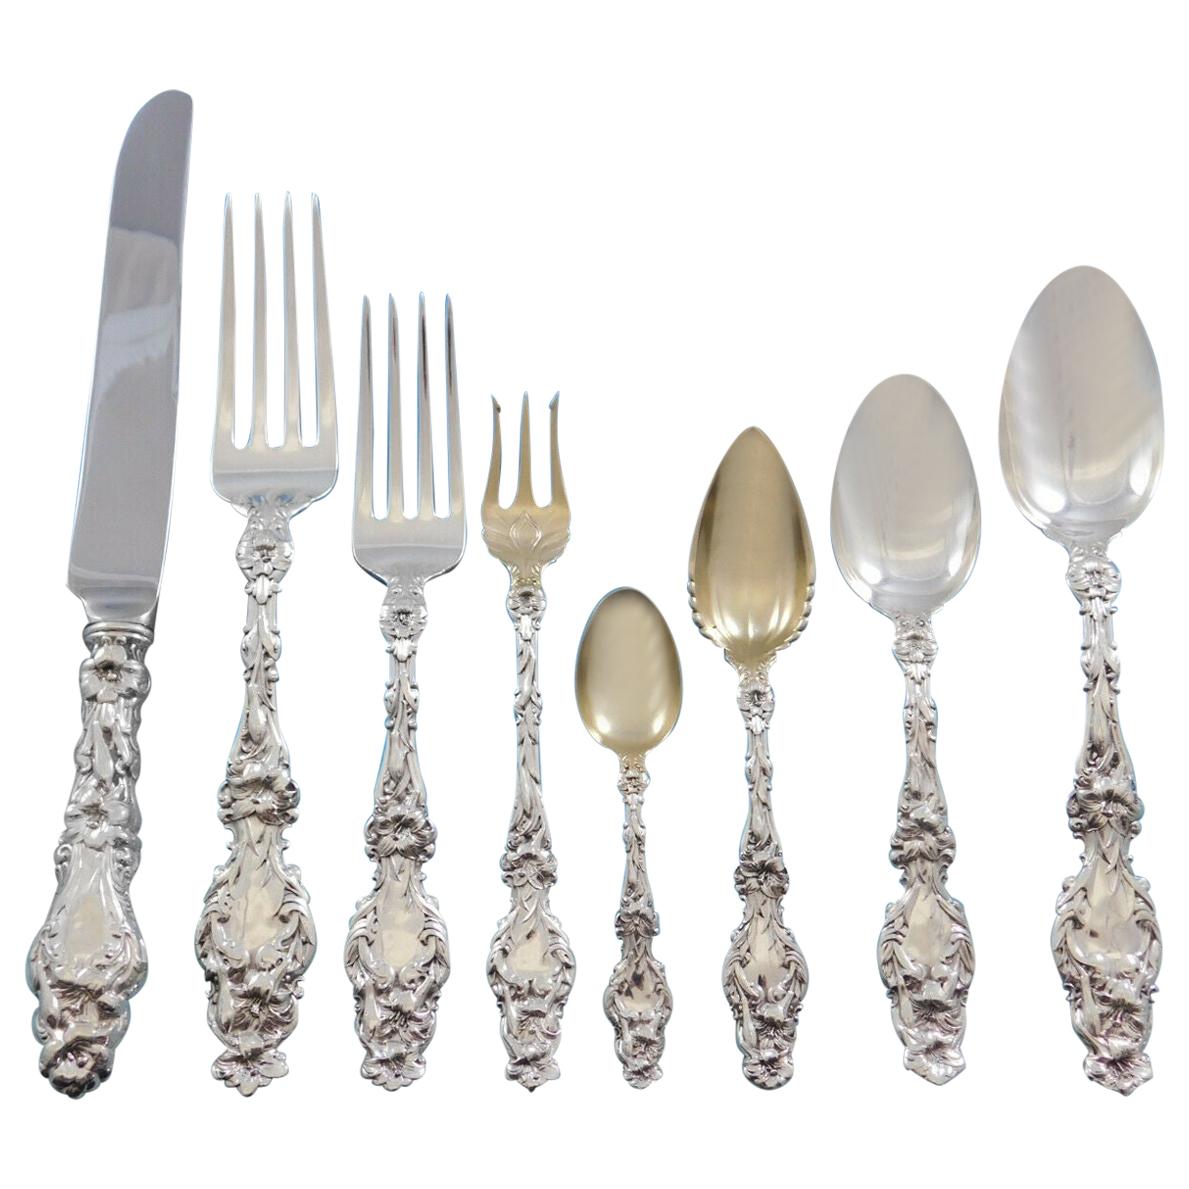 Lily by Whiting Sterling Silver Flatware Set for 8 Dinner Service 72 Pcs